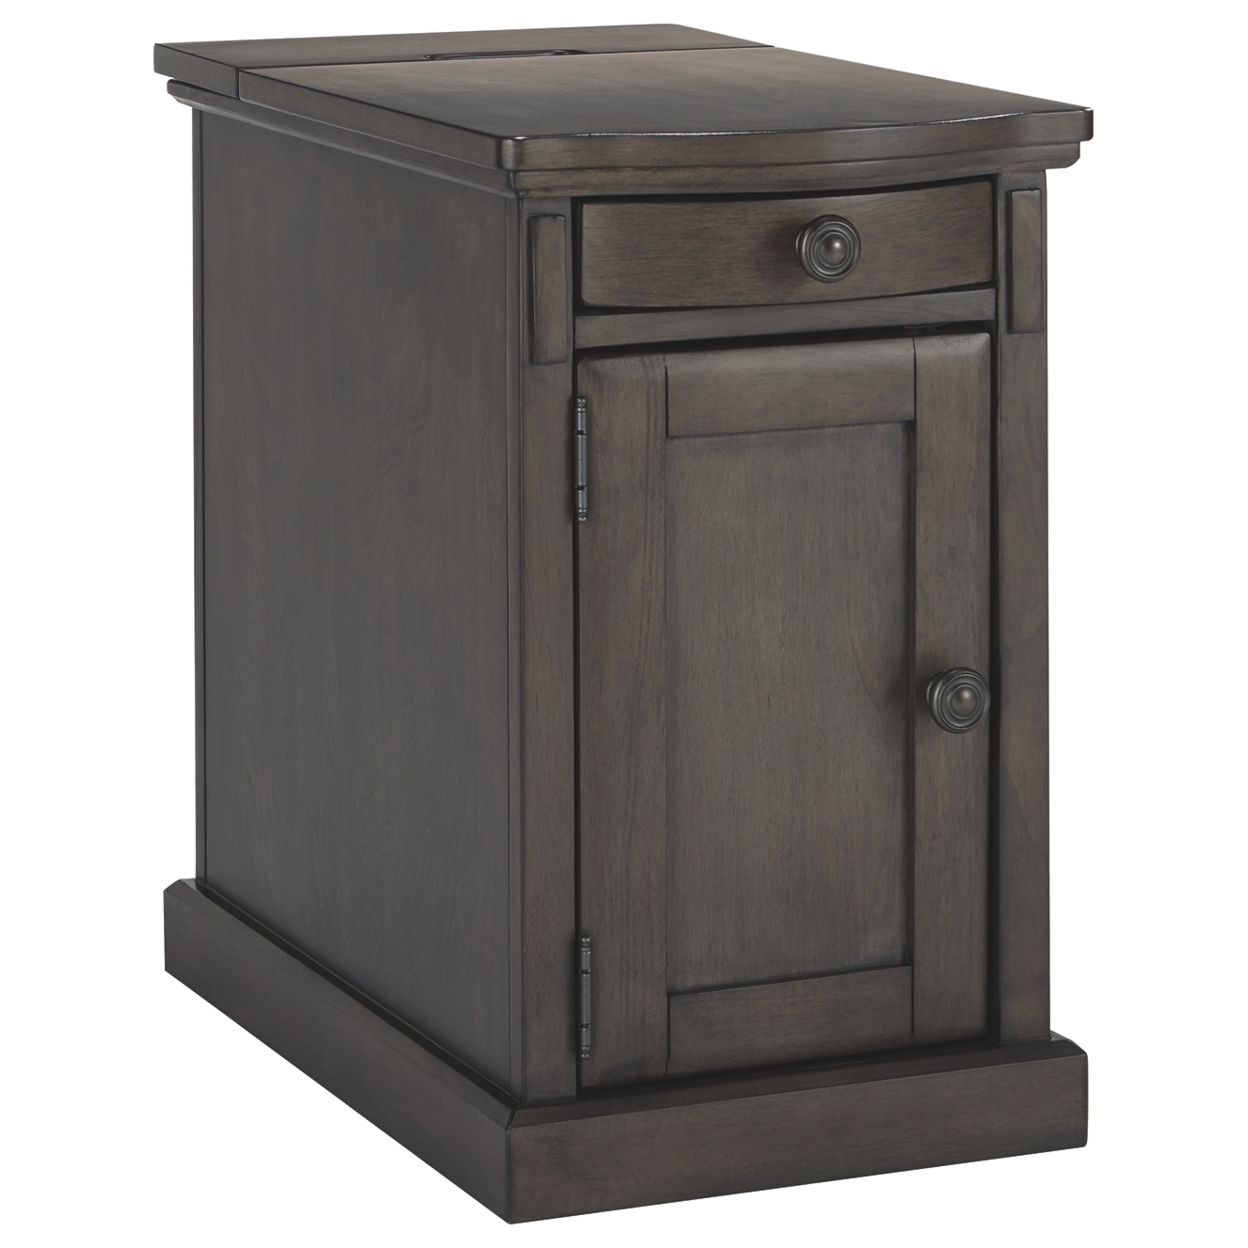 Wooden Chairside End Table With Curved Pull Out Tray And Power Hub, Gray- Saltoro Sherpi